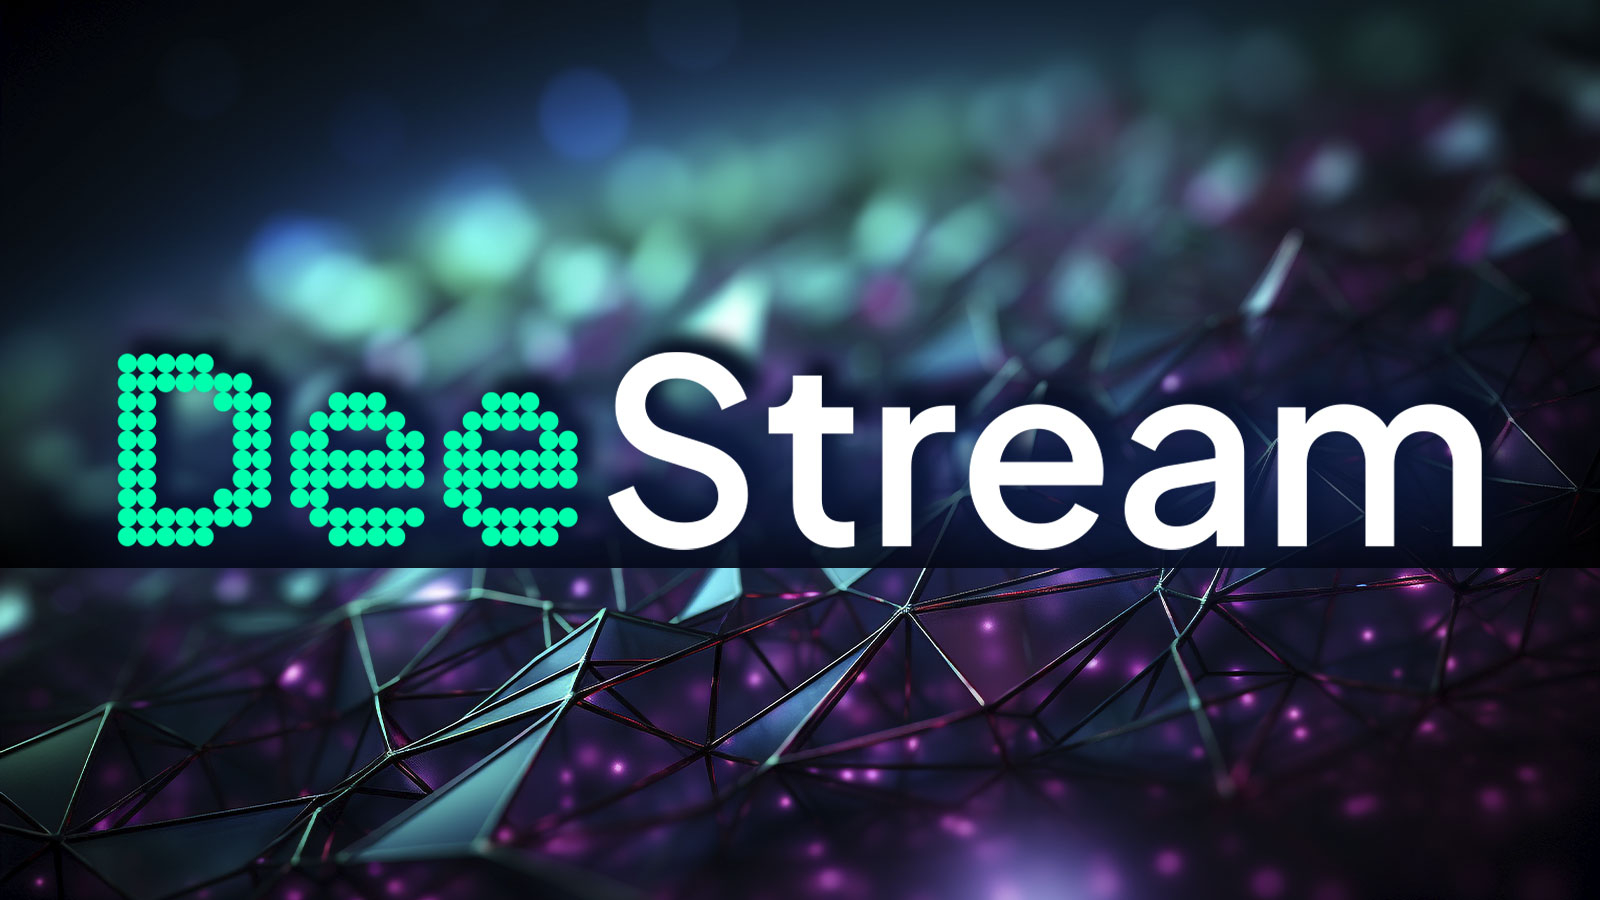 DeeStream (DST) Aims to Shake Up Streaming, Dogecoin (DOGE) & Shiba Inu (SHIB) Backers Predict Market Recovery